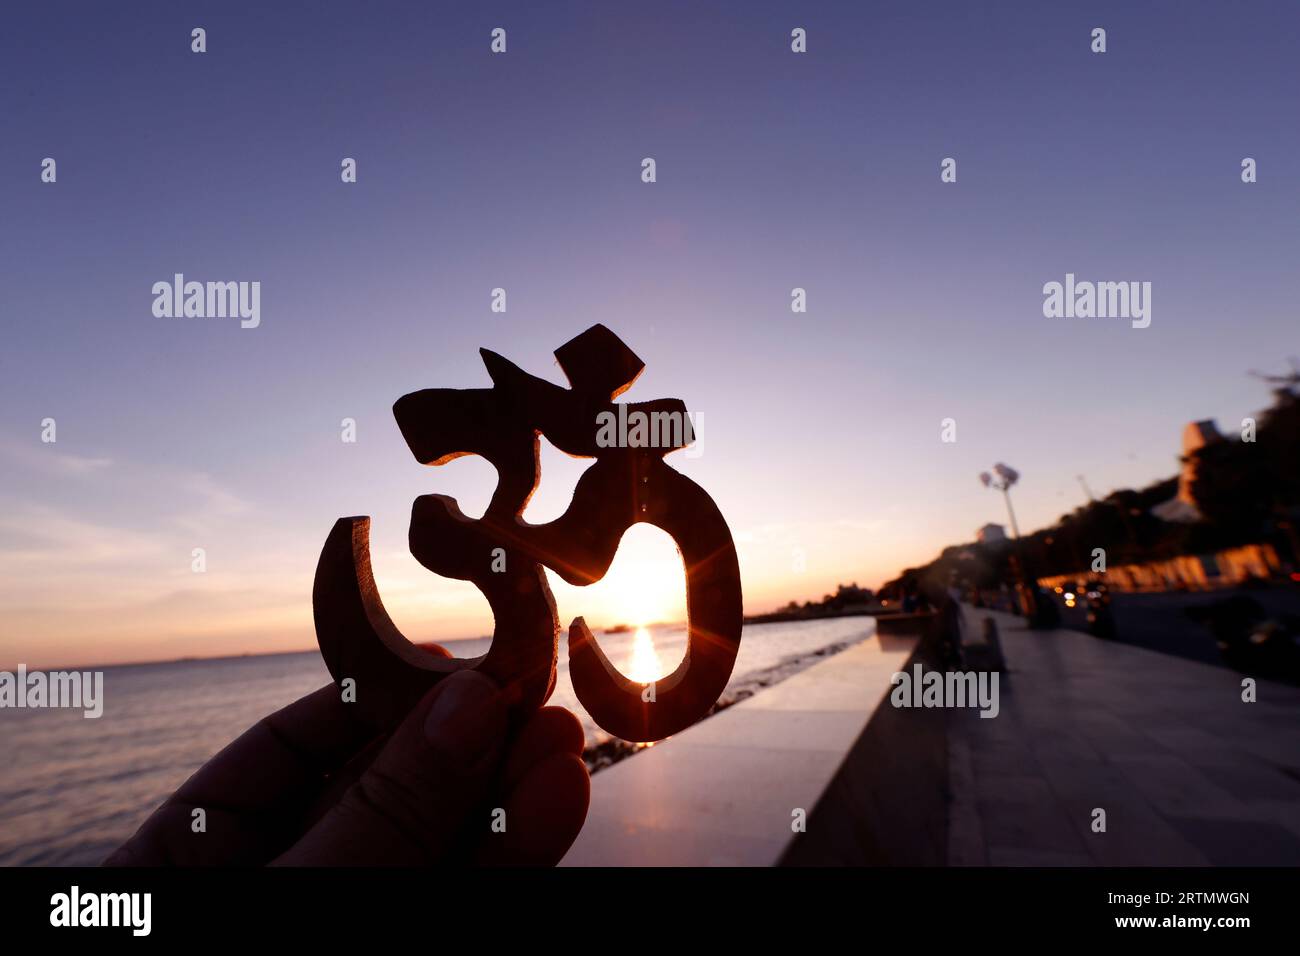 The Om or Aum symbol. In Hinduism, Om is one of the most important spiritual sounds. Ho Chi Minh city.  Vietnam. Stock Photo